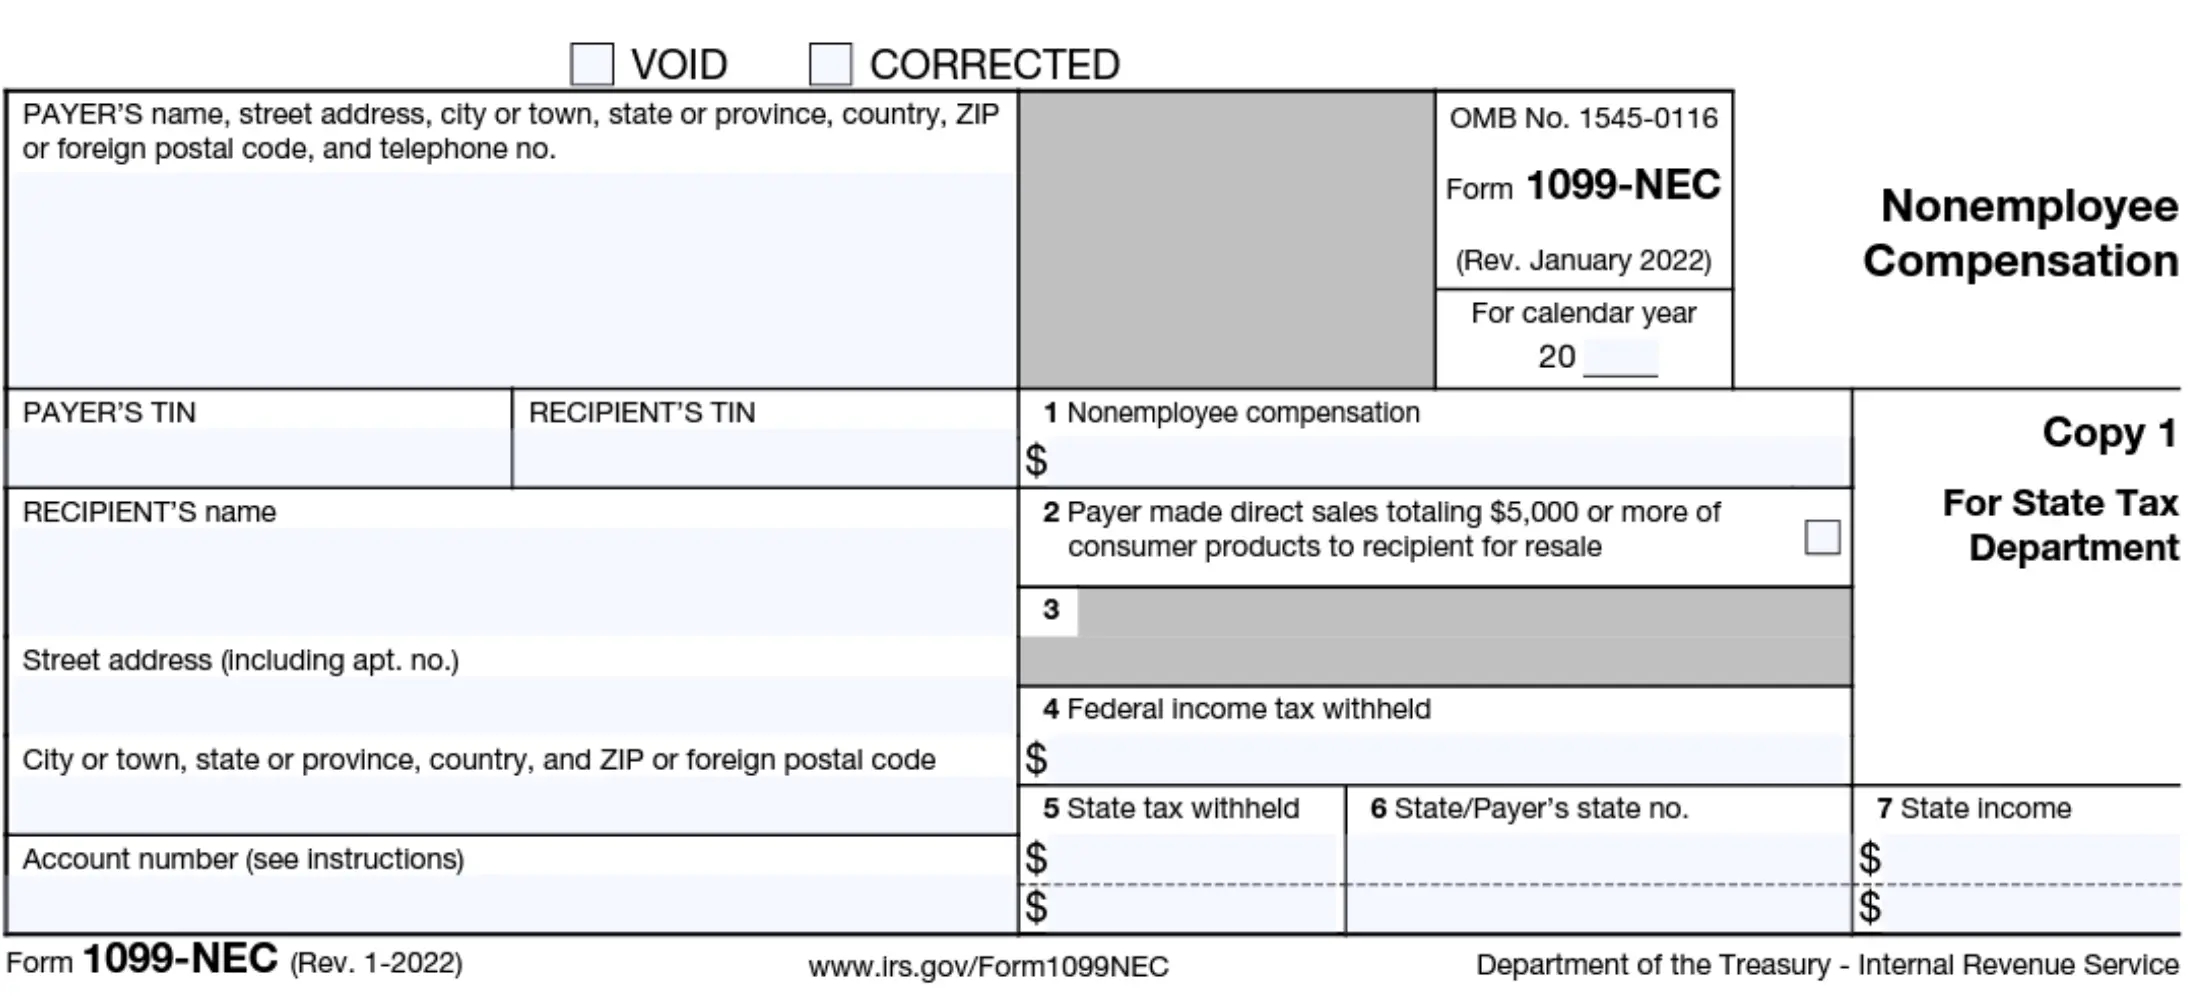 Image of Form 1099-NEC for reporting nonemployee compensation and direct sales. Includes payer and recipient details, taxes, and state income.